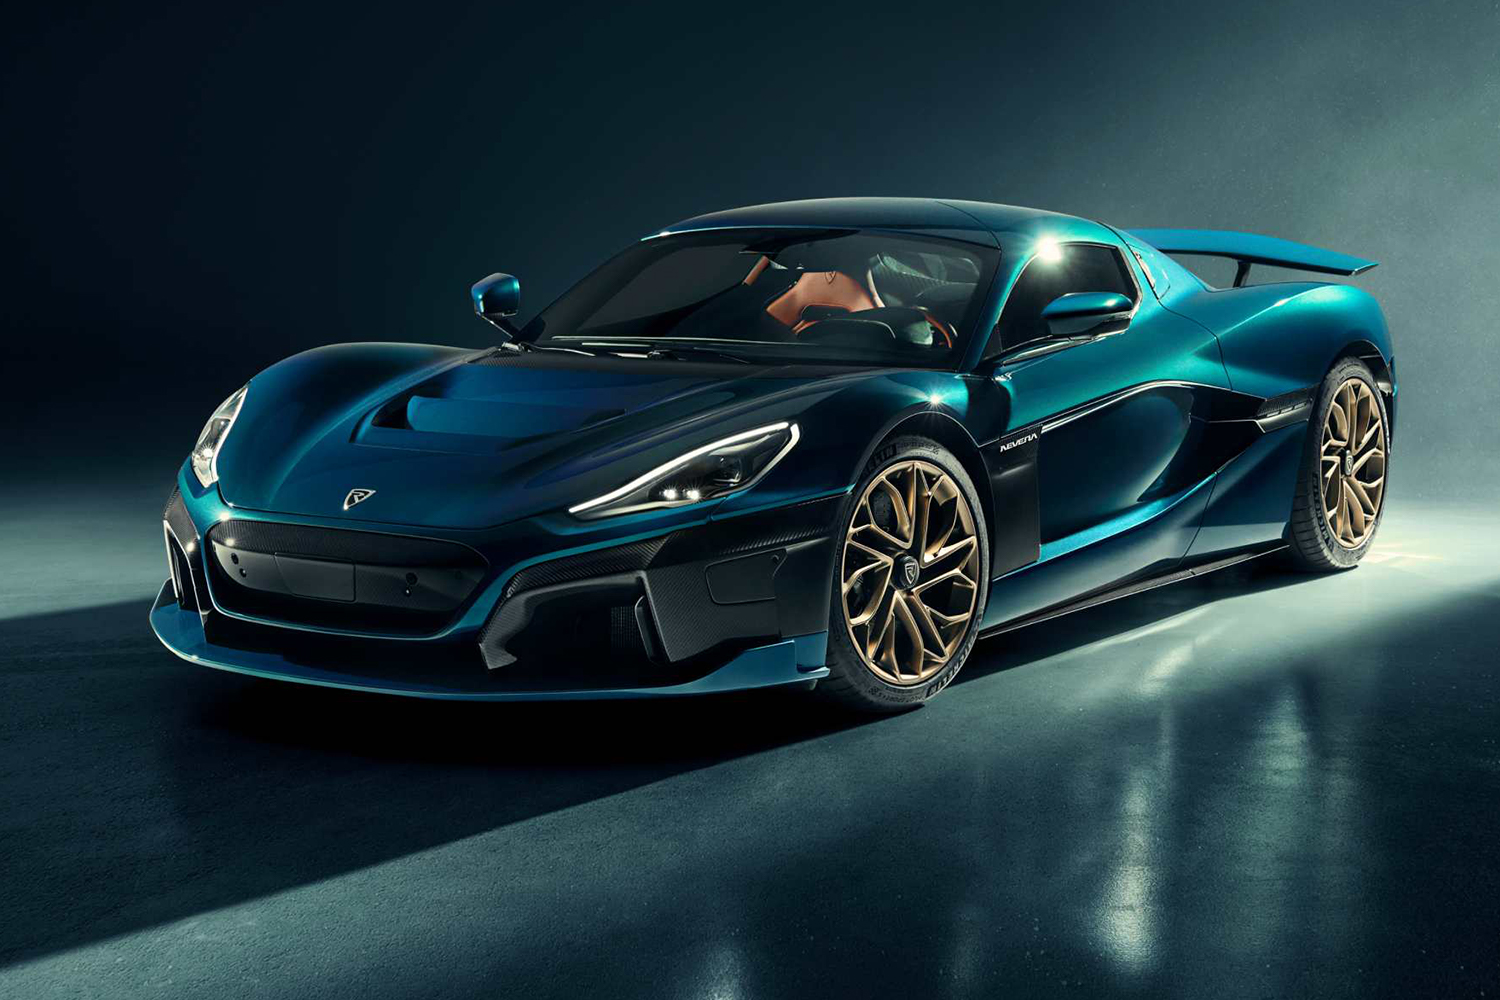 The Rimac Nevera electric hypercar, which could be the quickest sports car ever made